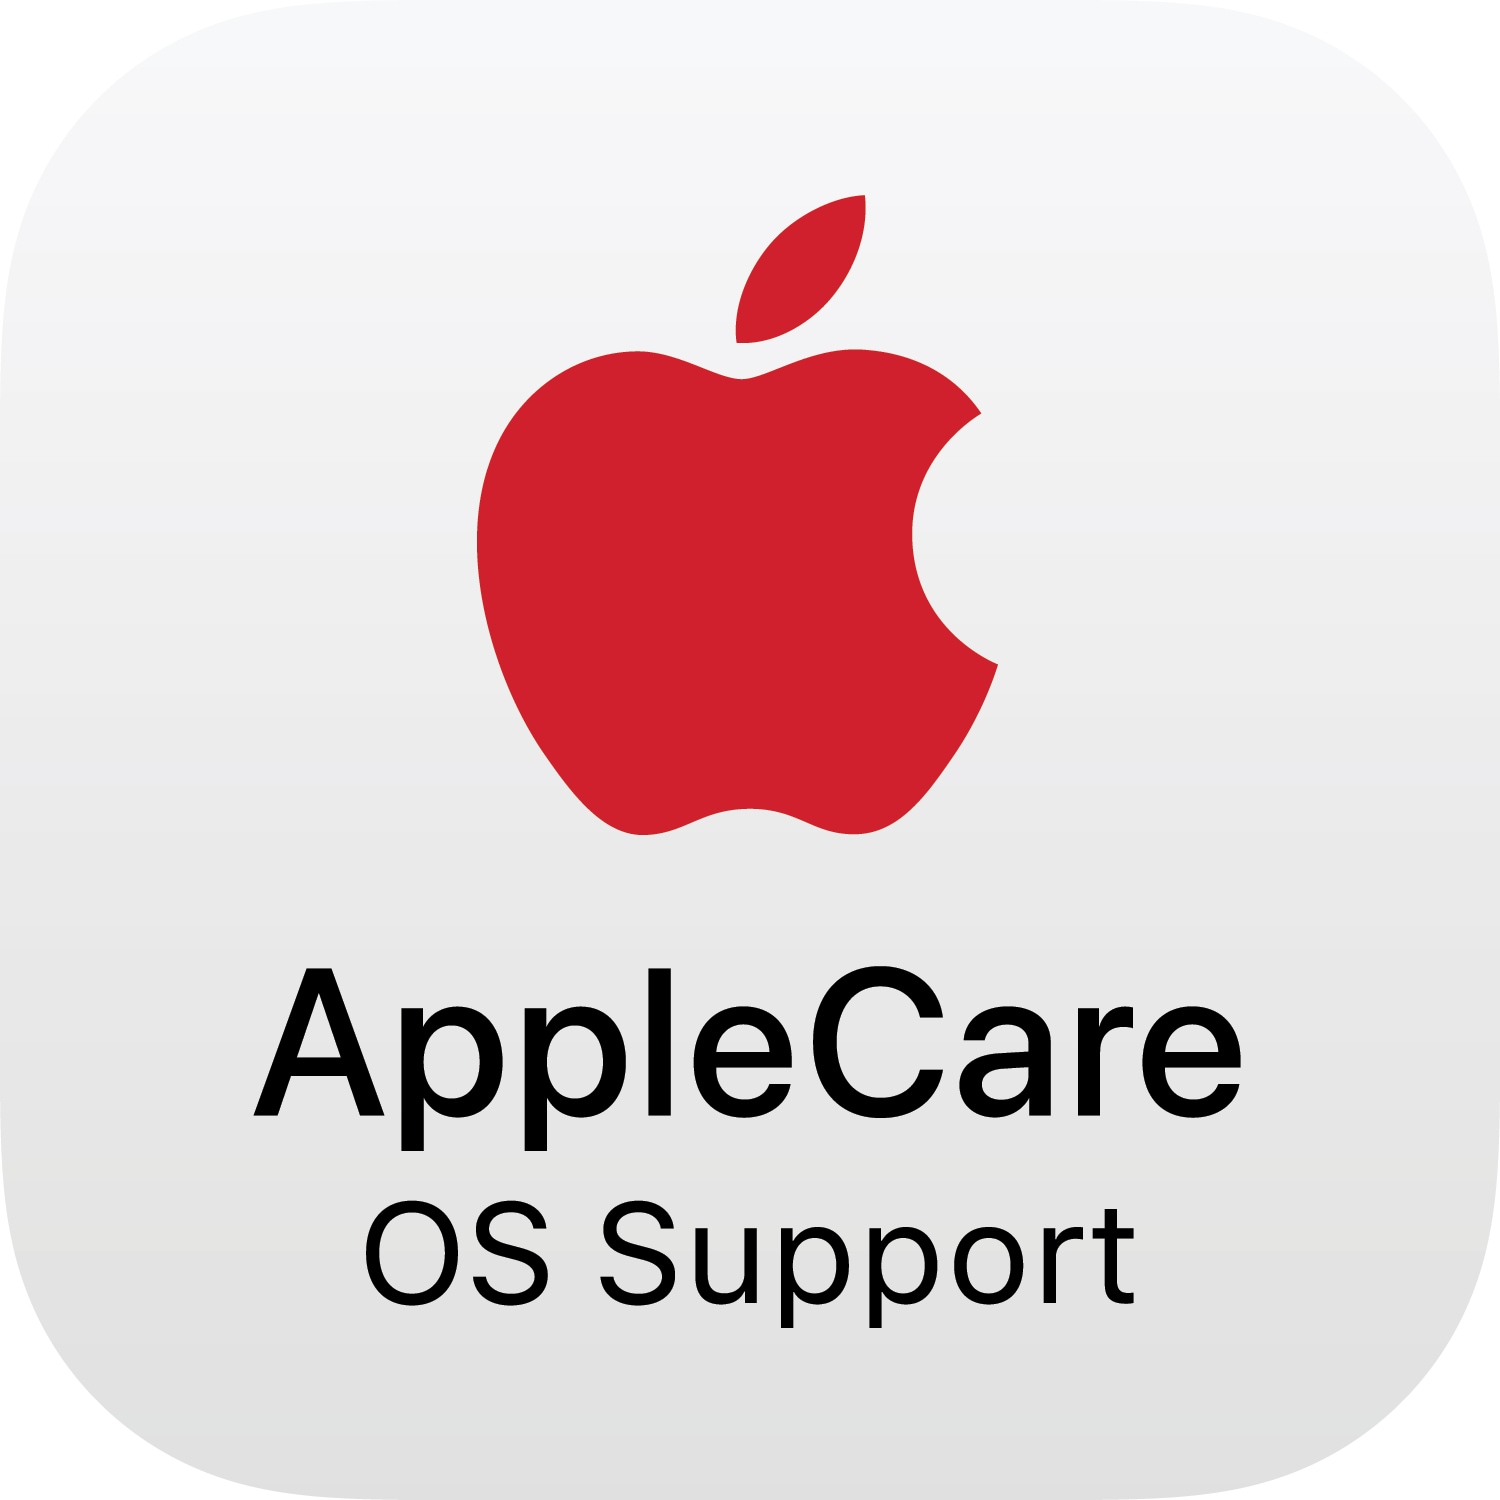 AppleCare OS Support - Preferred - technical support - for Apple Mac OS X Server Software - 2 years